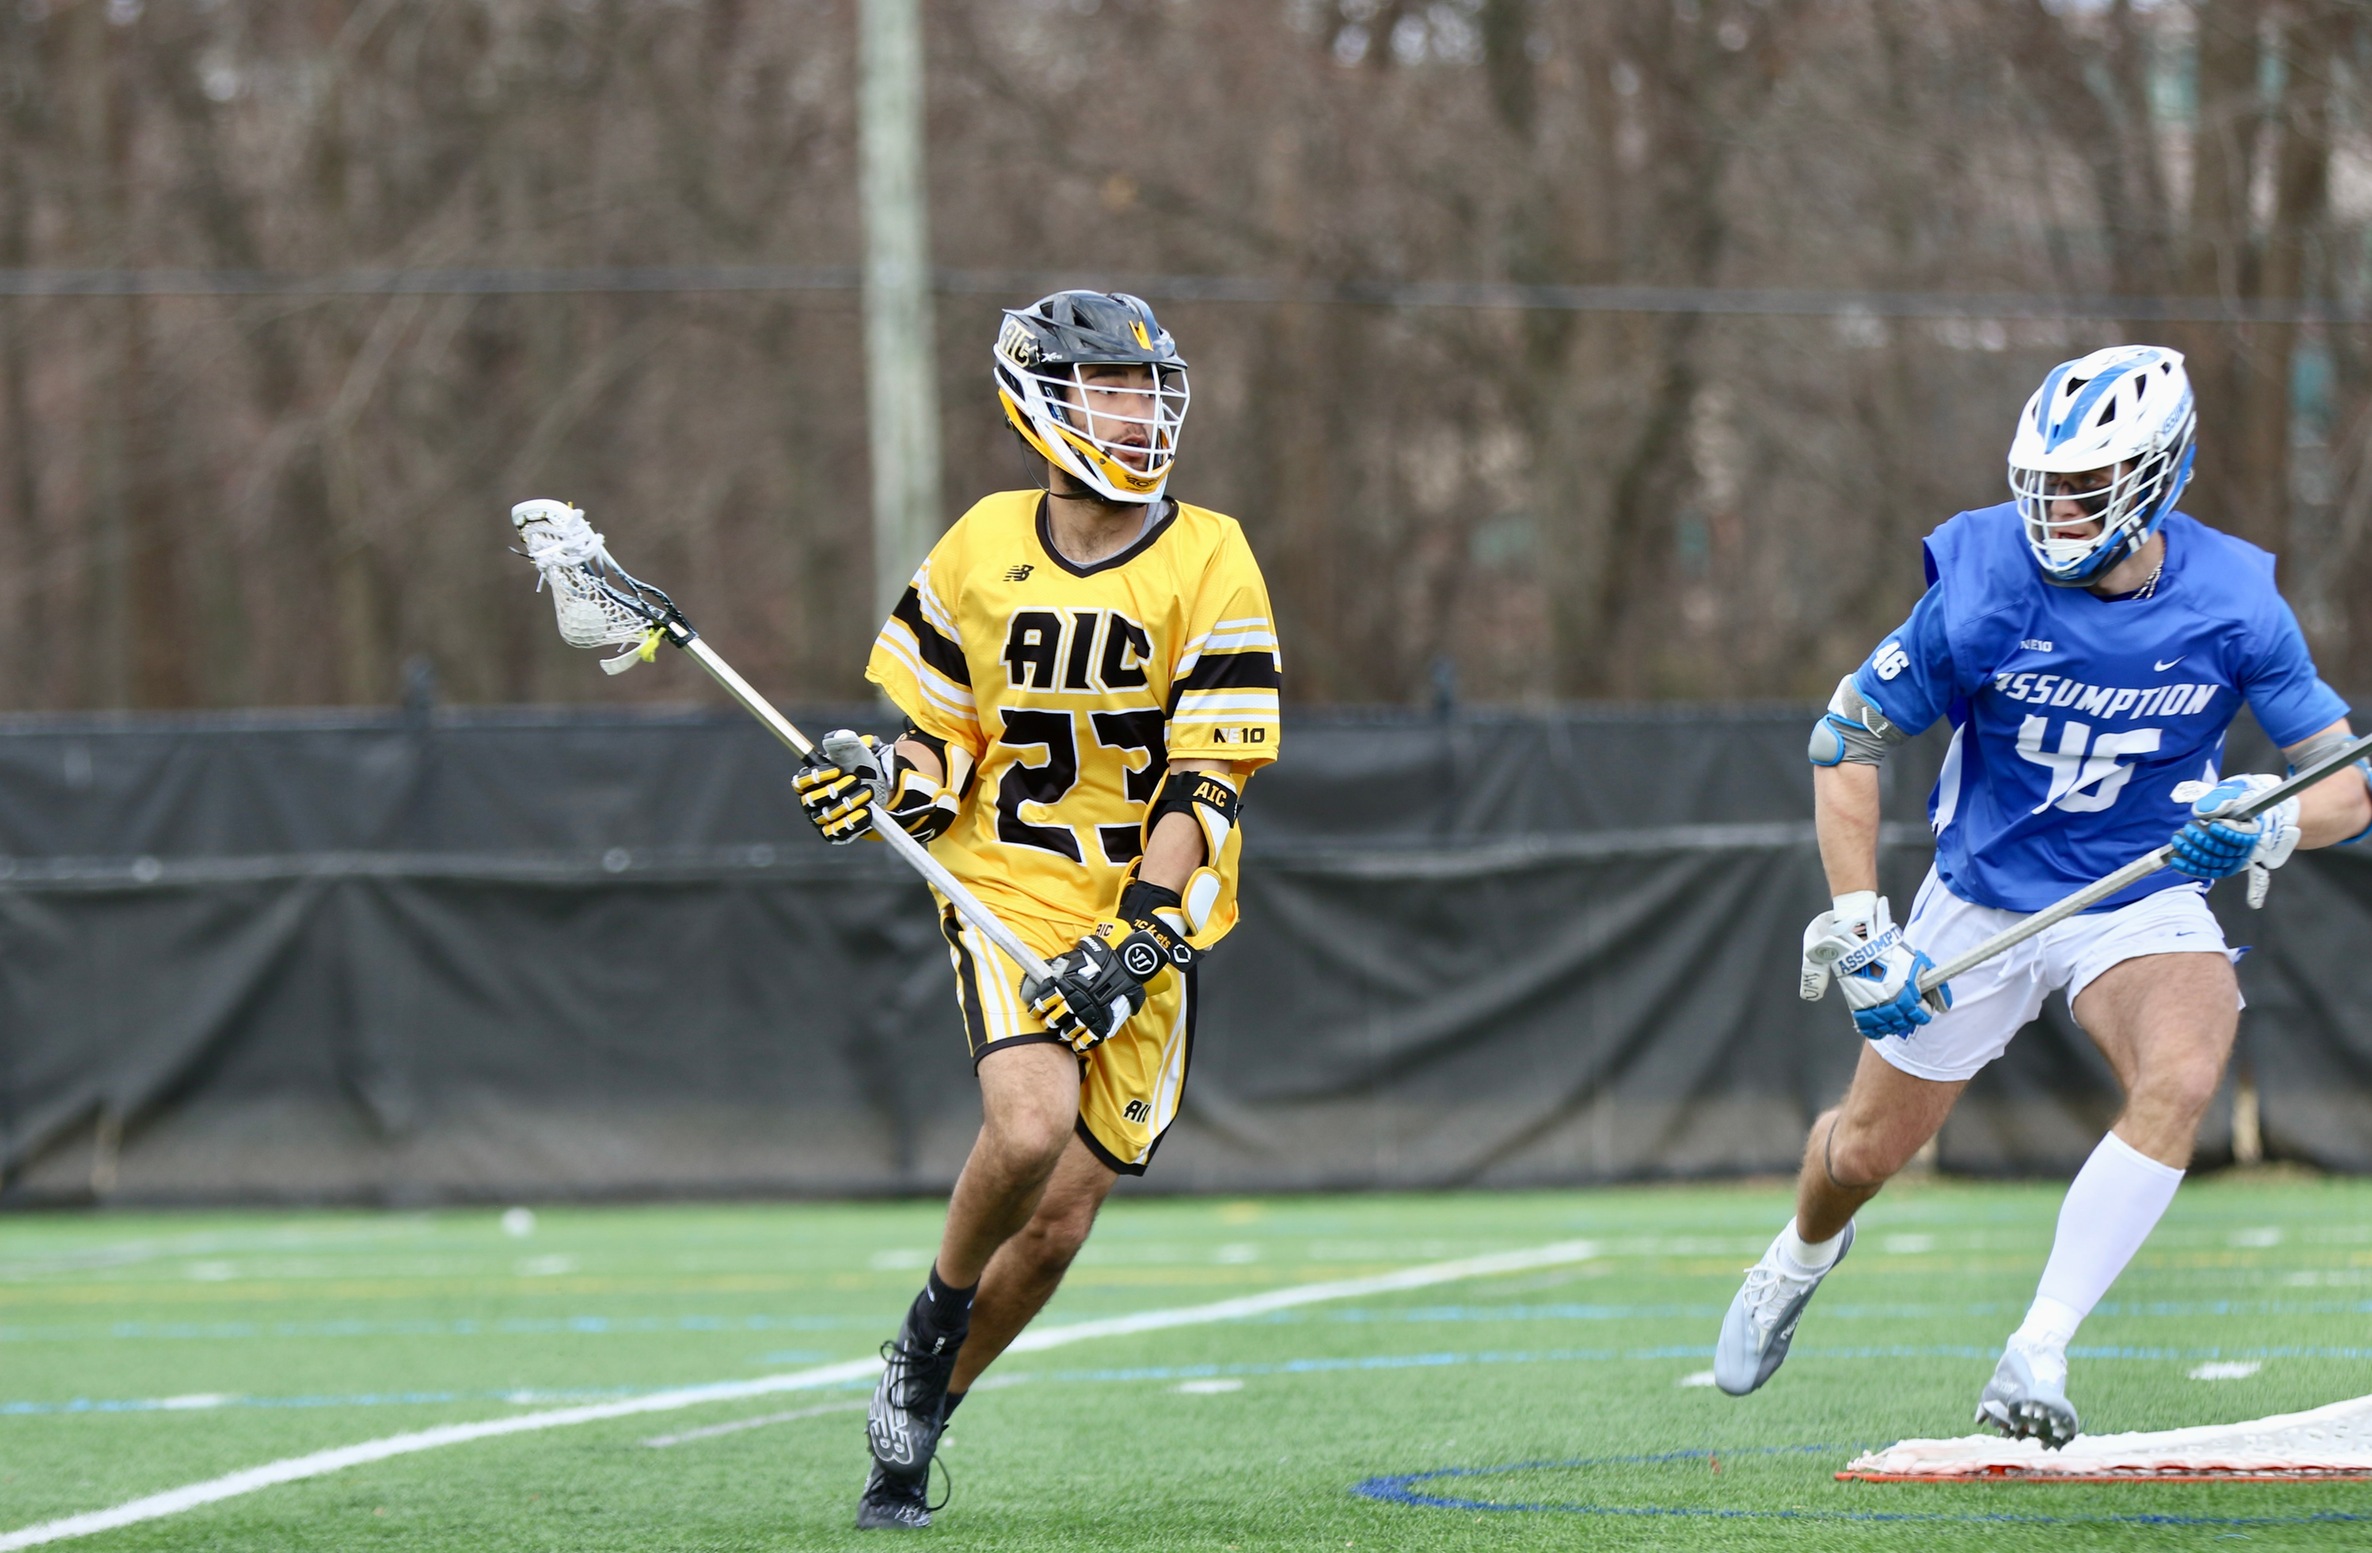 Men's Lacrosse stands strong in tight loss against Assumption